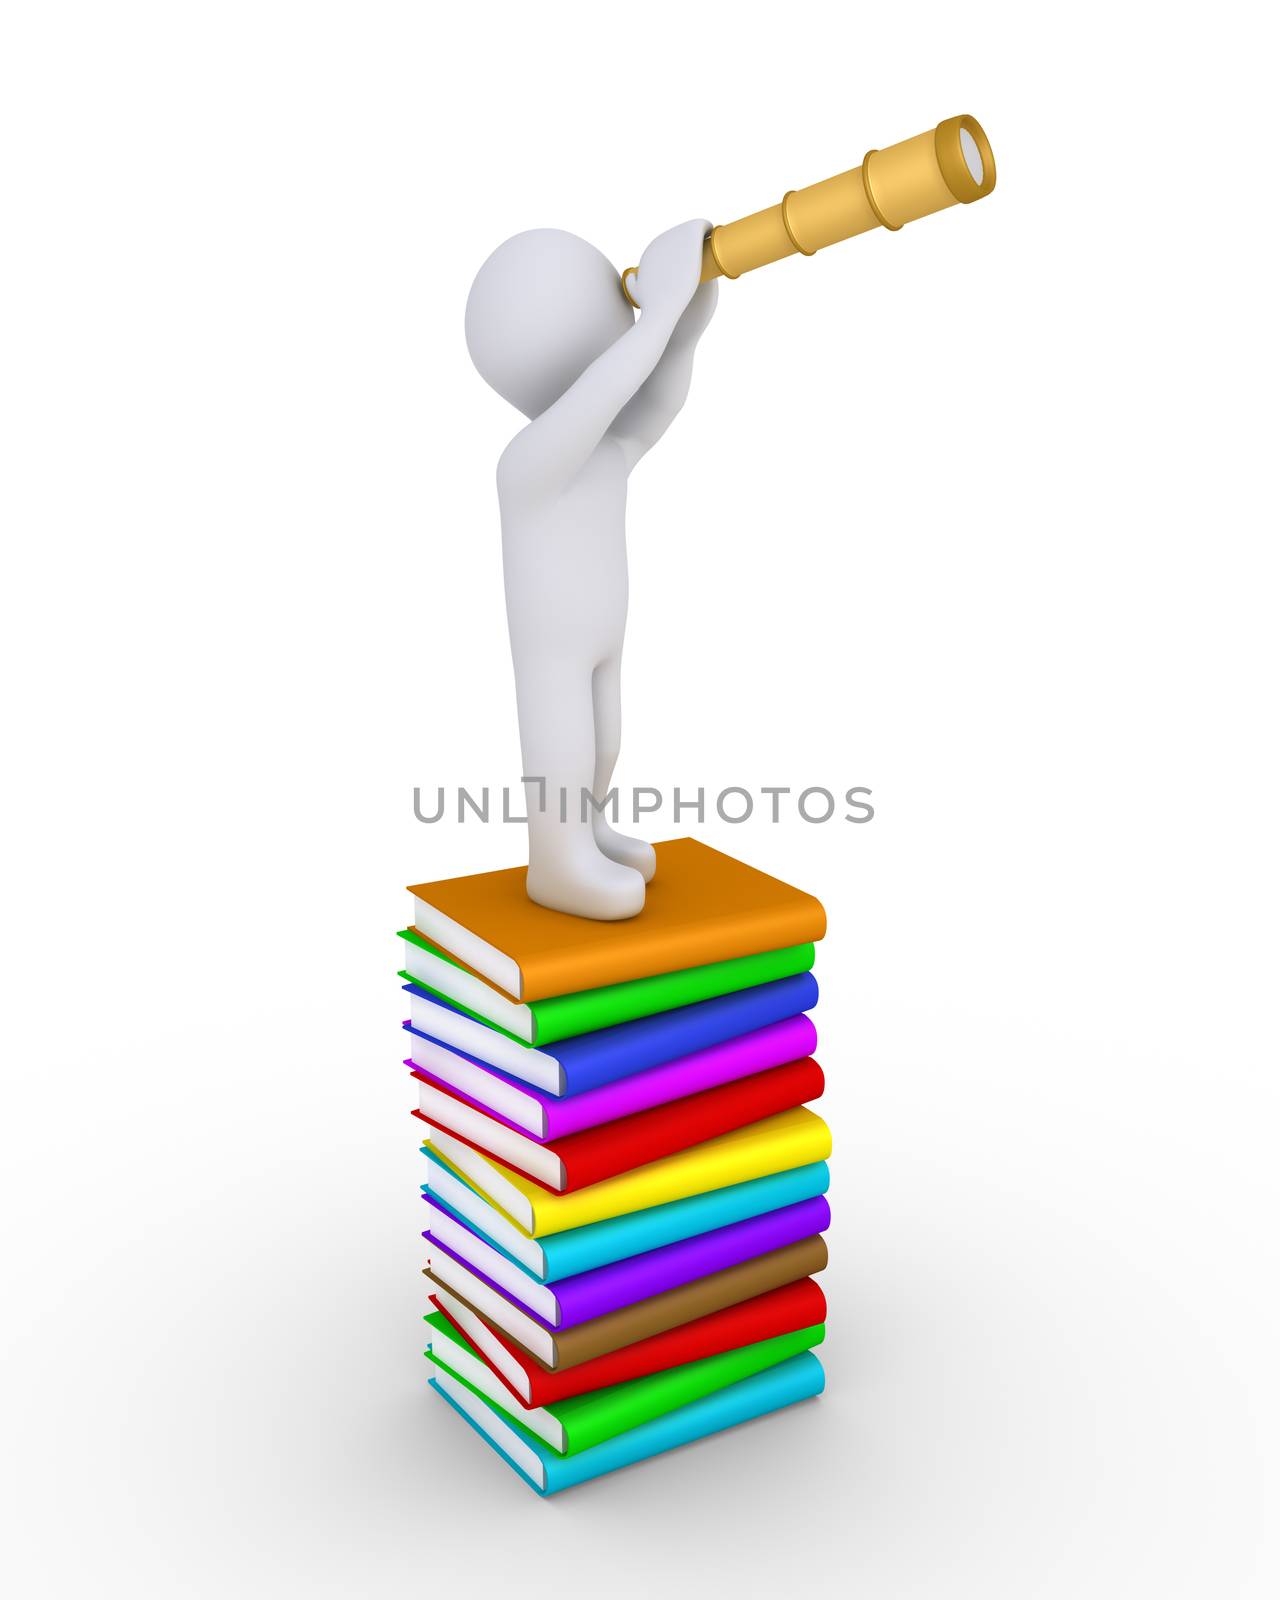 Person is looking through a telescope while standing over a pile of stacked books